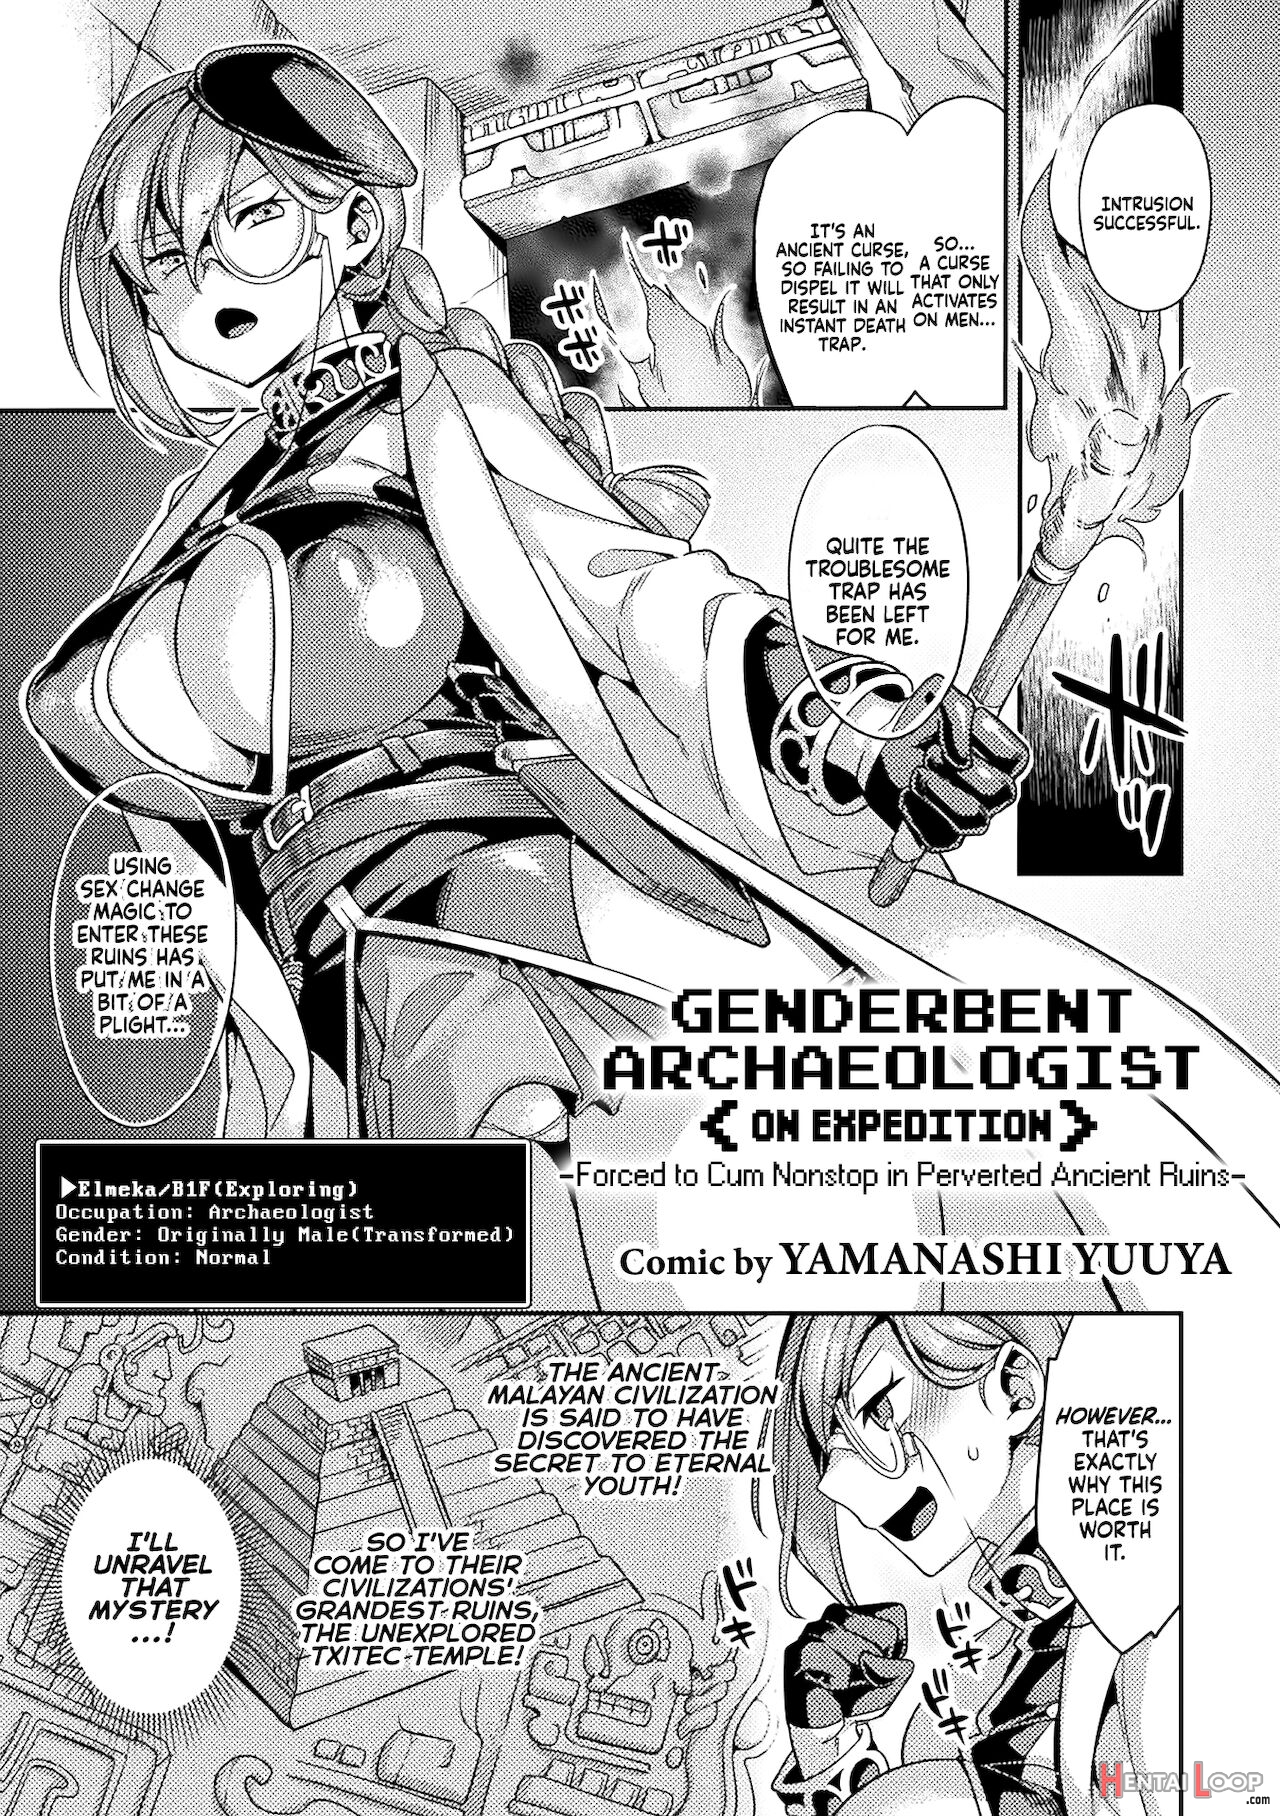 Genderbent Archaeologist <on Expedition> -forced To Cum Nonstop In Perverted Ancient Ruins- page 1